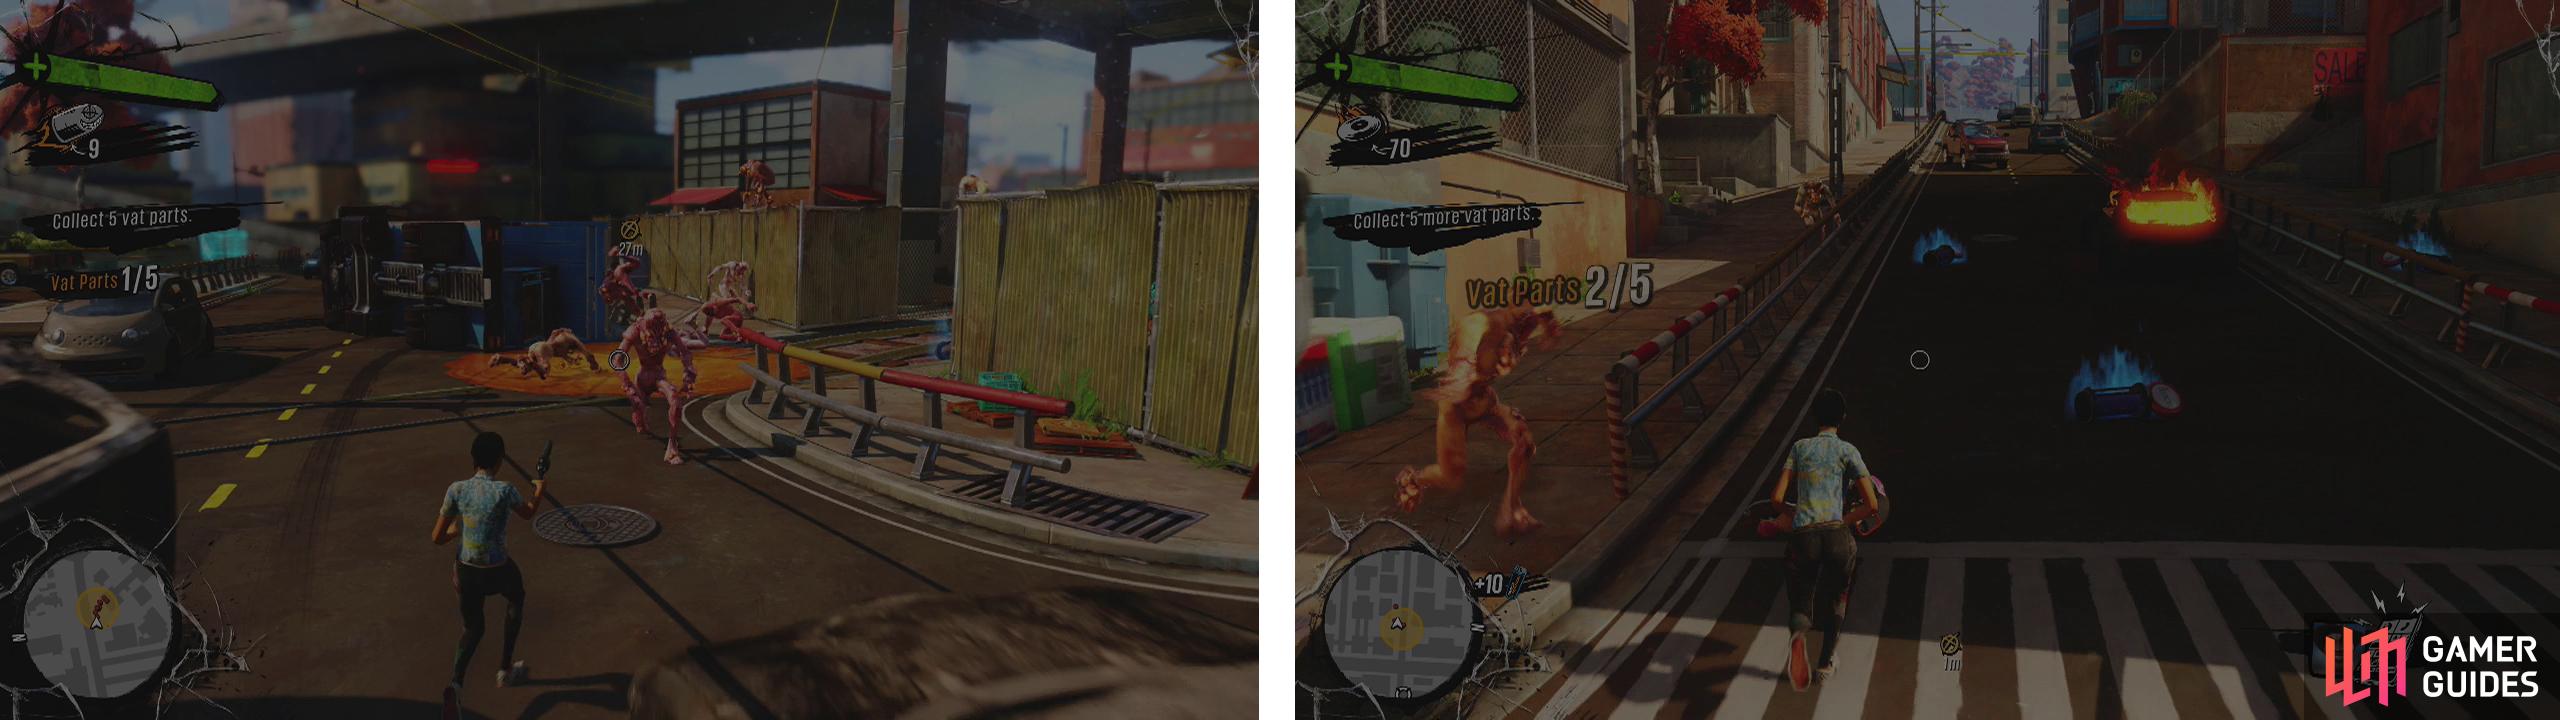 Find the Vat parts at the first crash site (left). Continue along the train tracks and loot a second crash site for more Vat Parts (right).